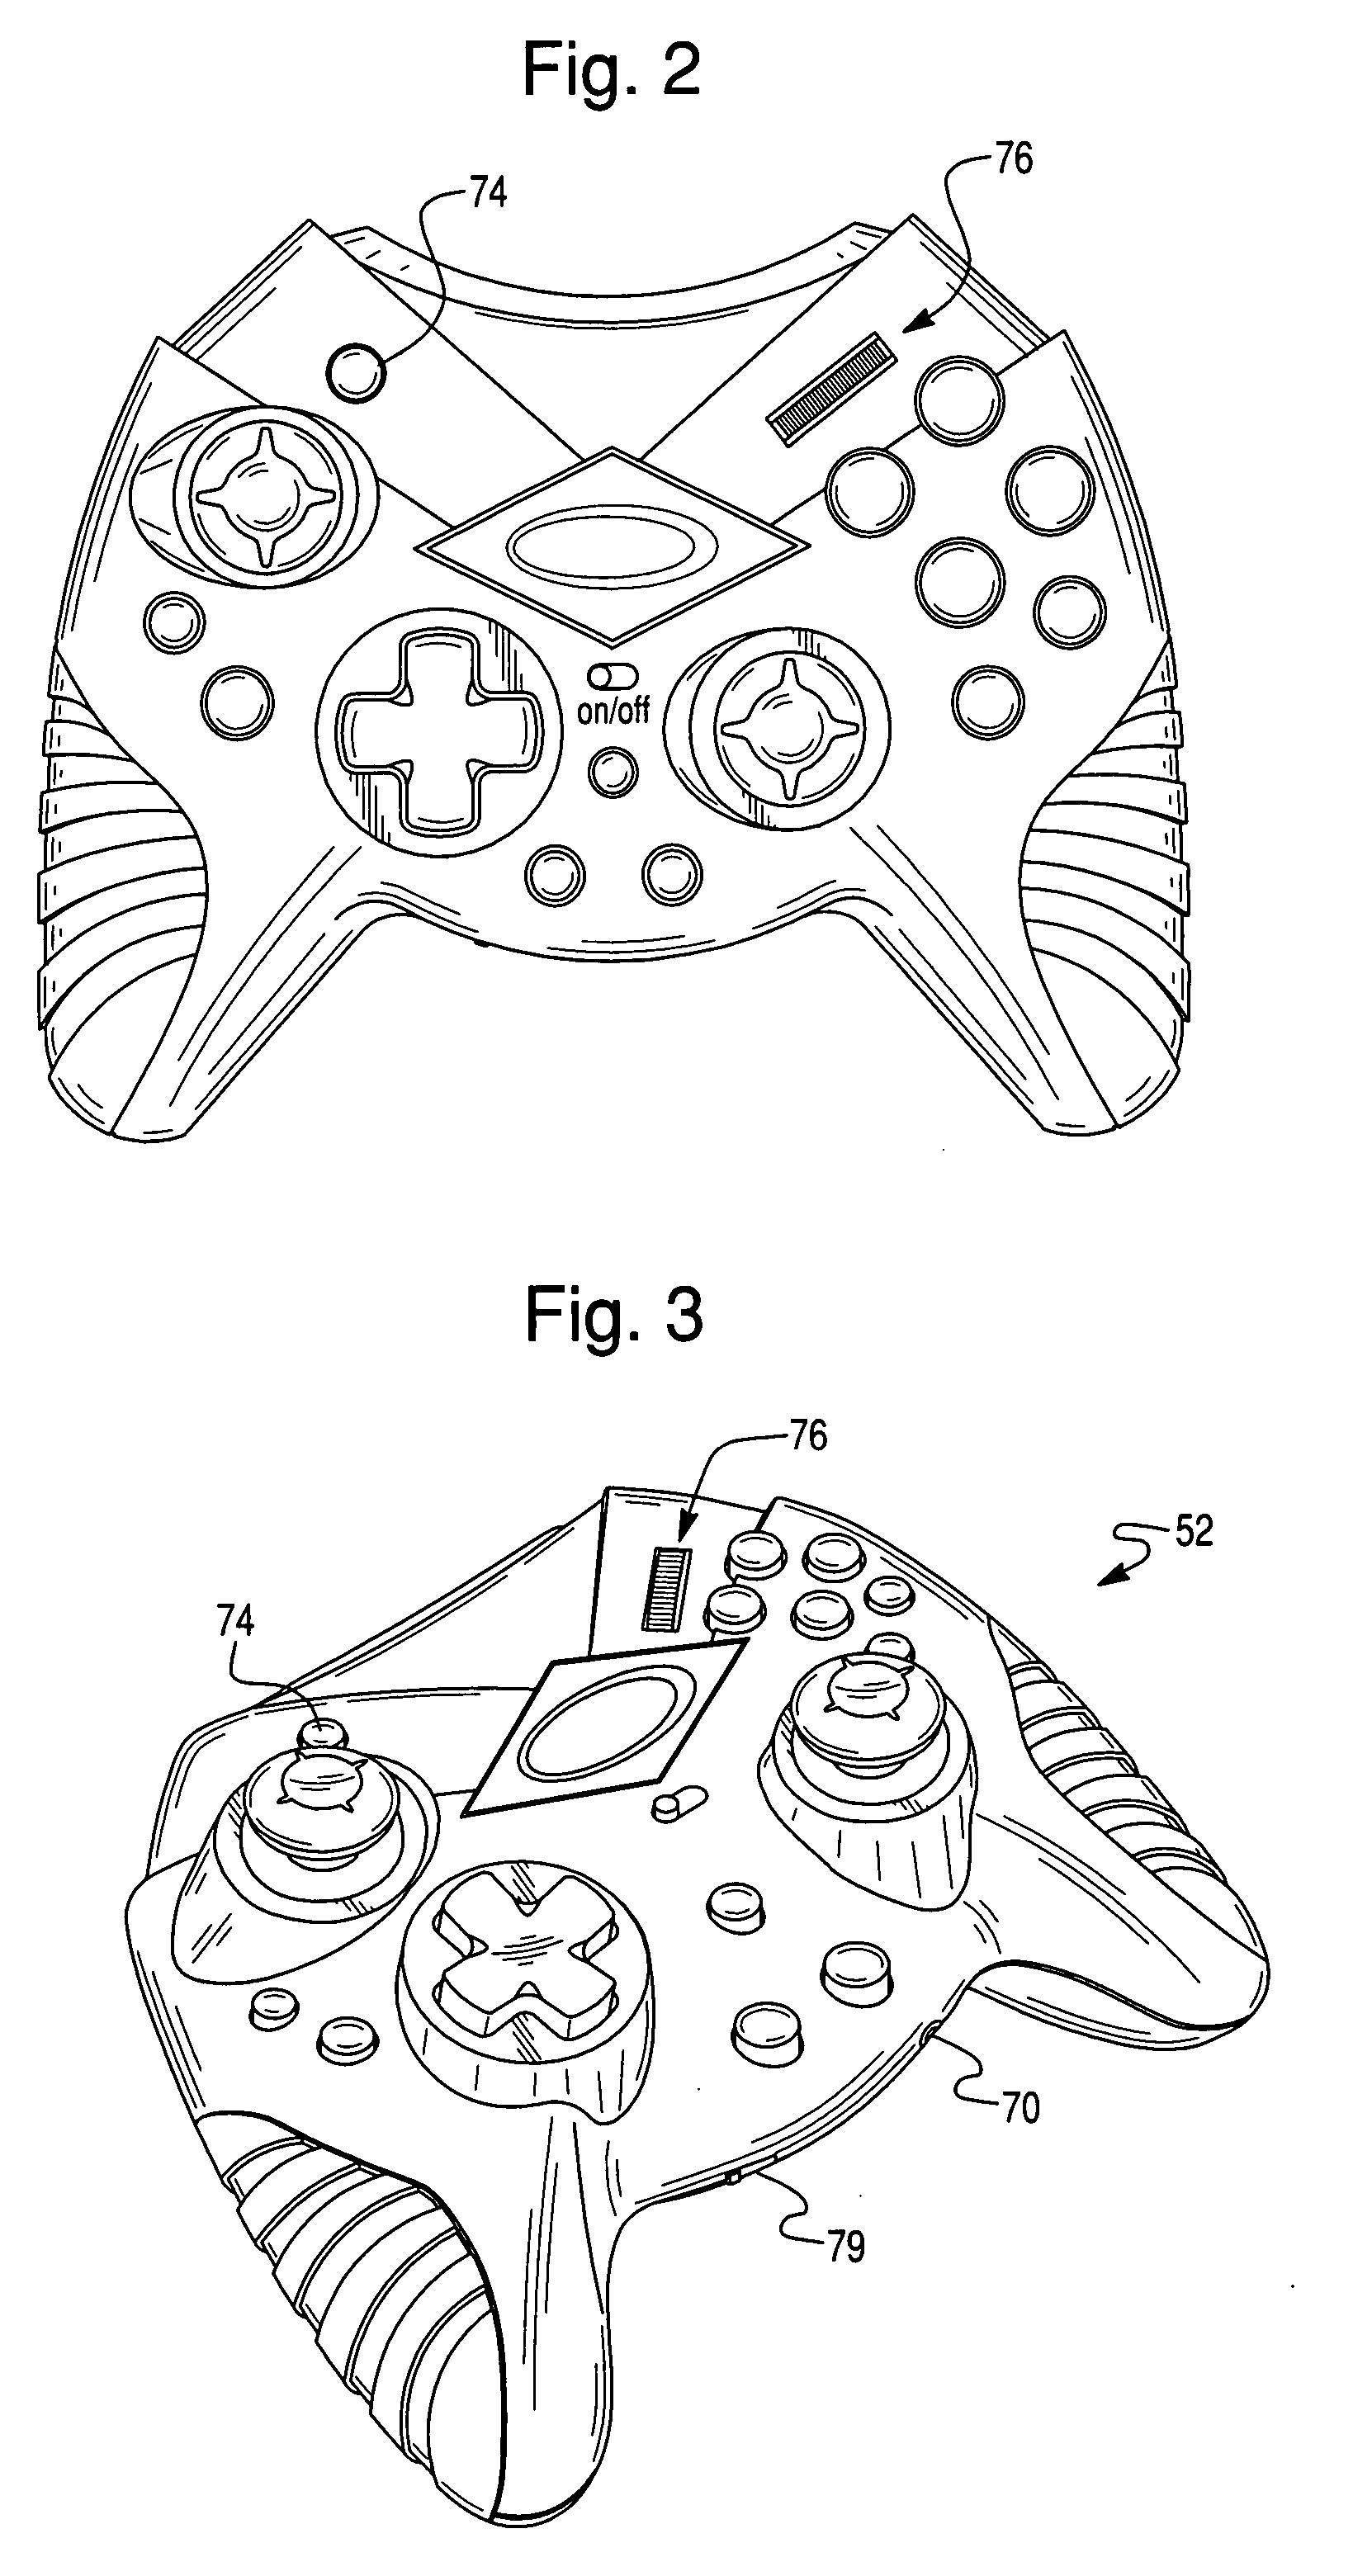 Wireless game controller with integrated audio system